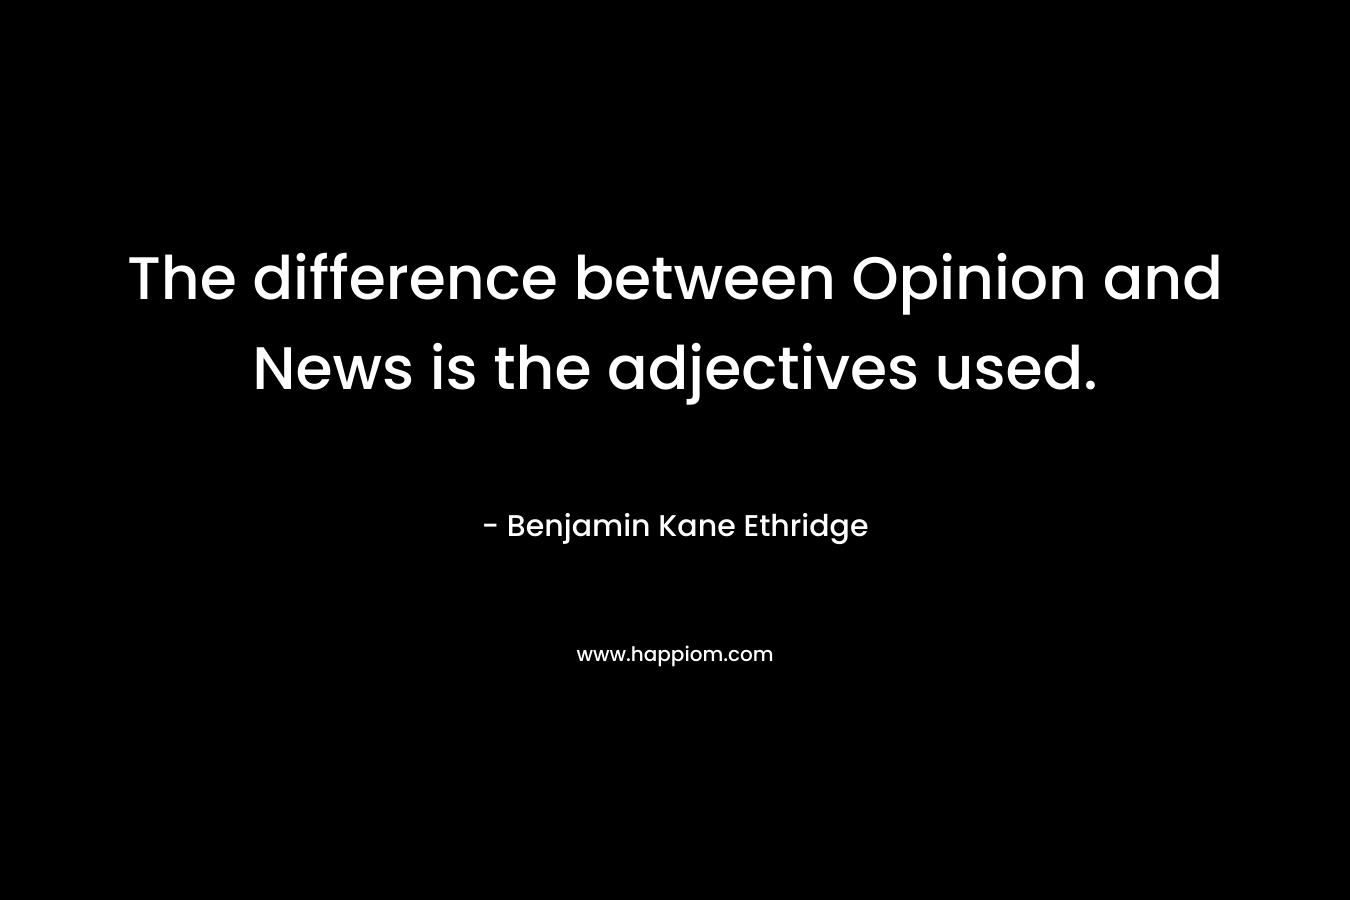 The difference between Opinion and News is the adjectives used. – Benjamin Kane Ethridge